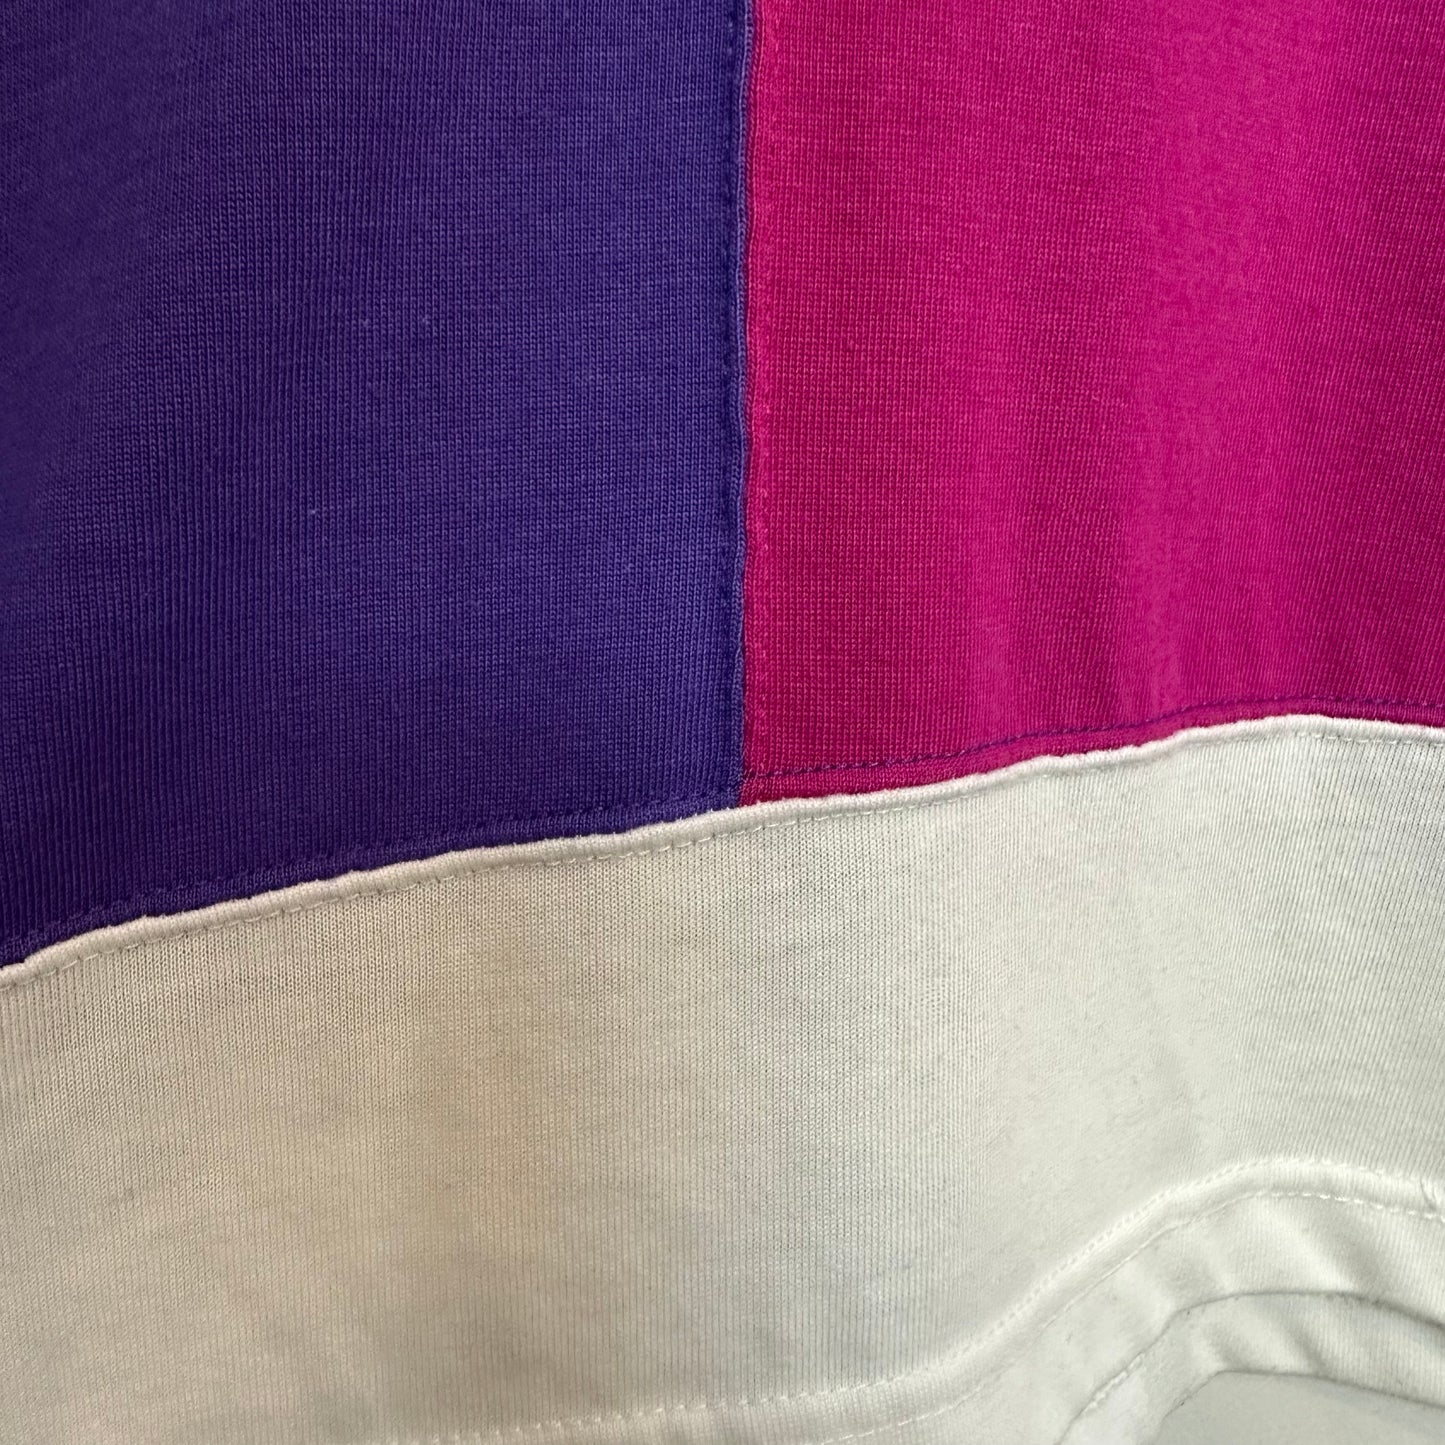 Vintage 90s P.S. Sport Polo Cropped Top Color Block Pink Purple Small